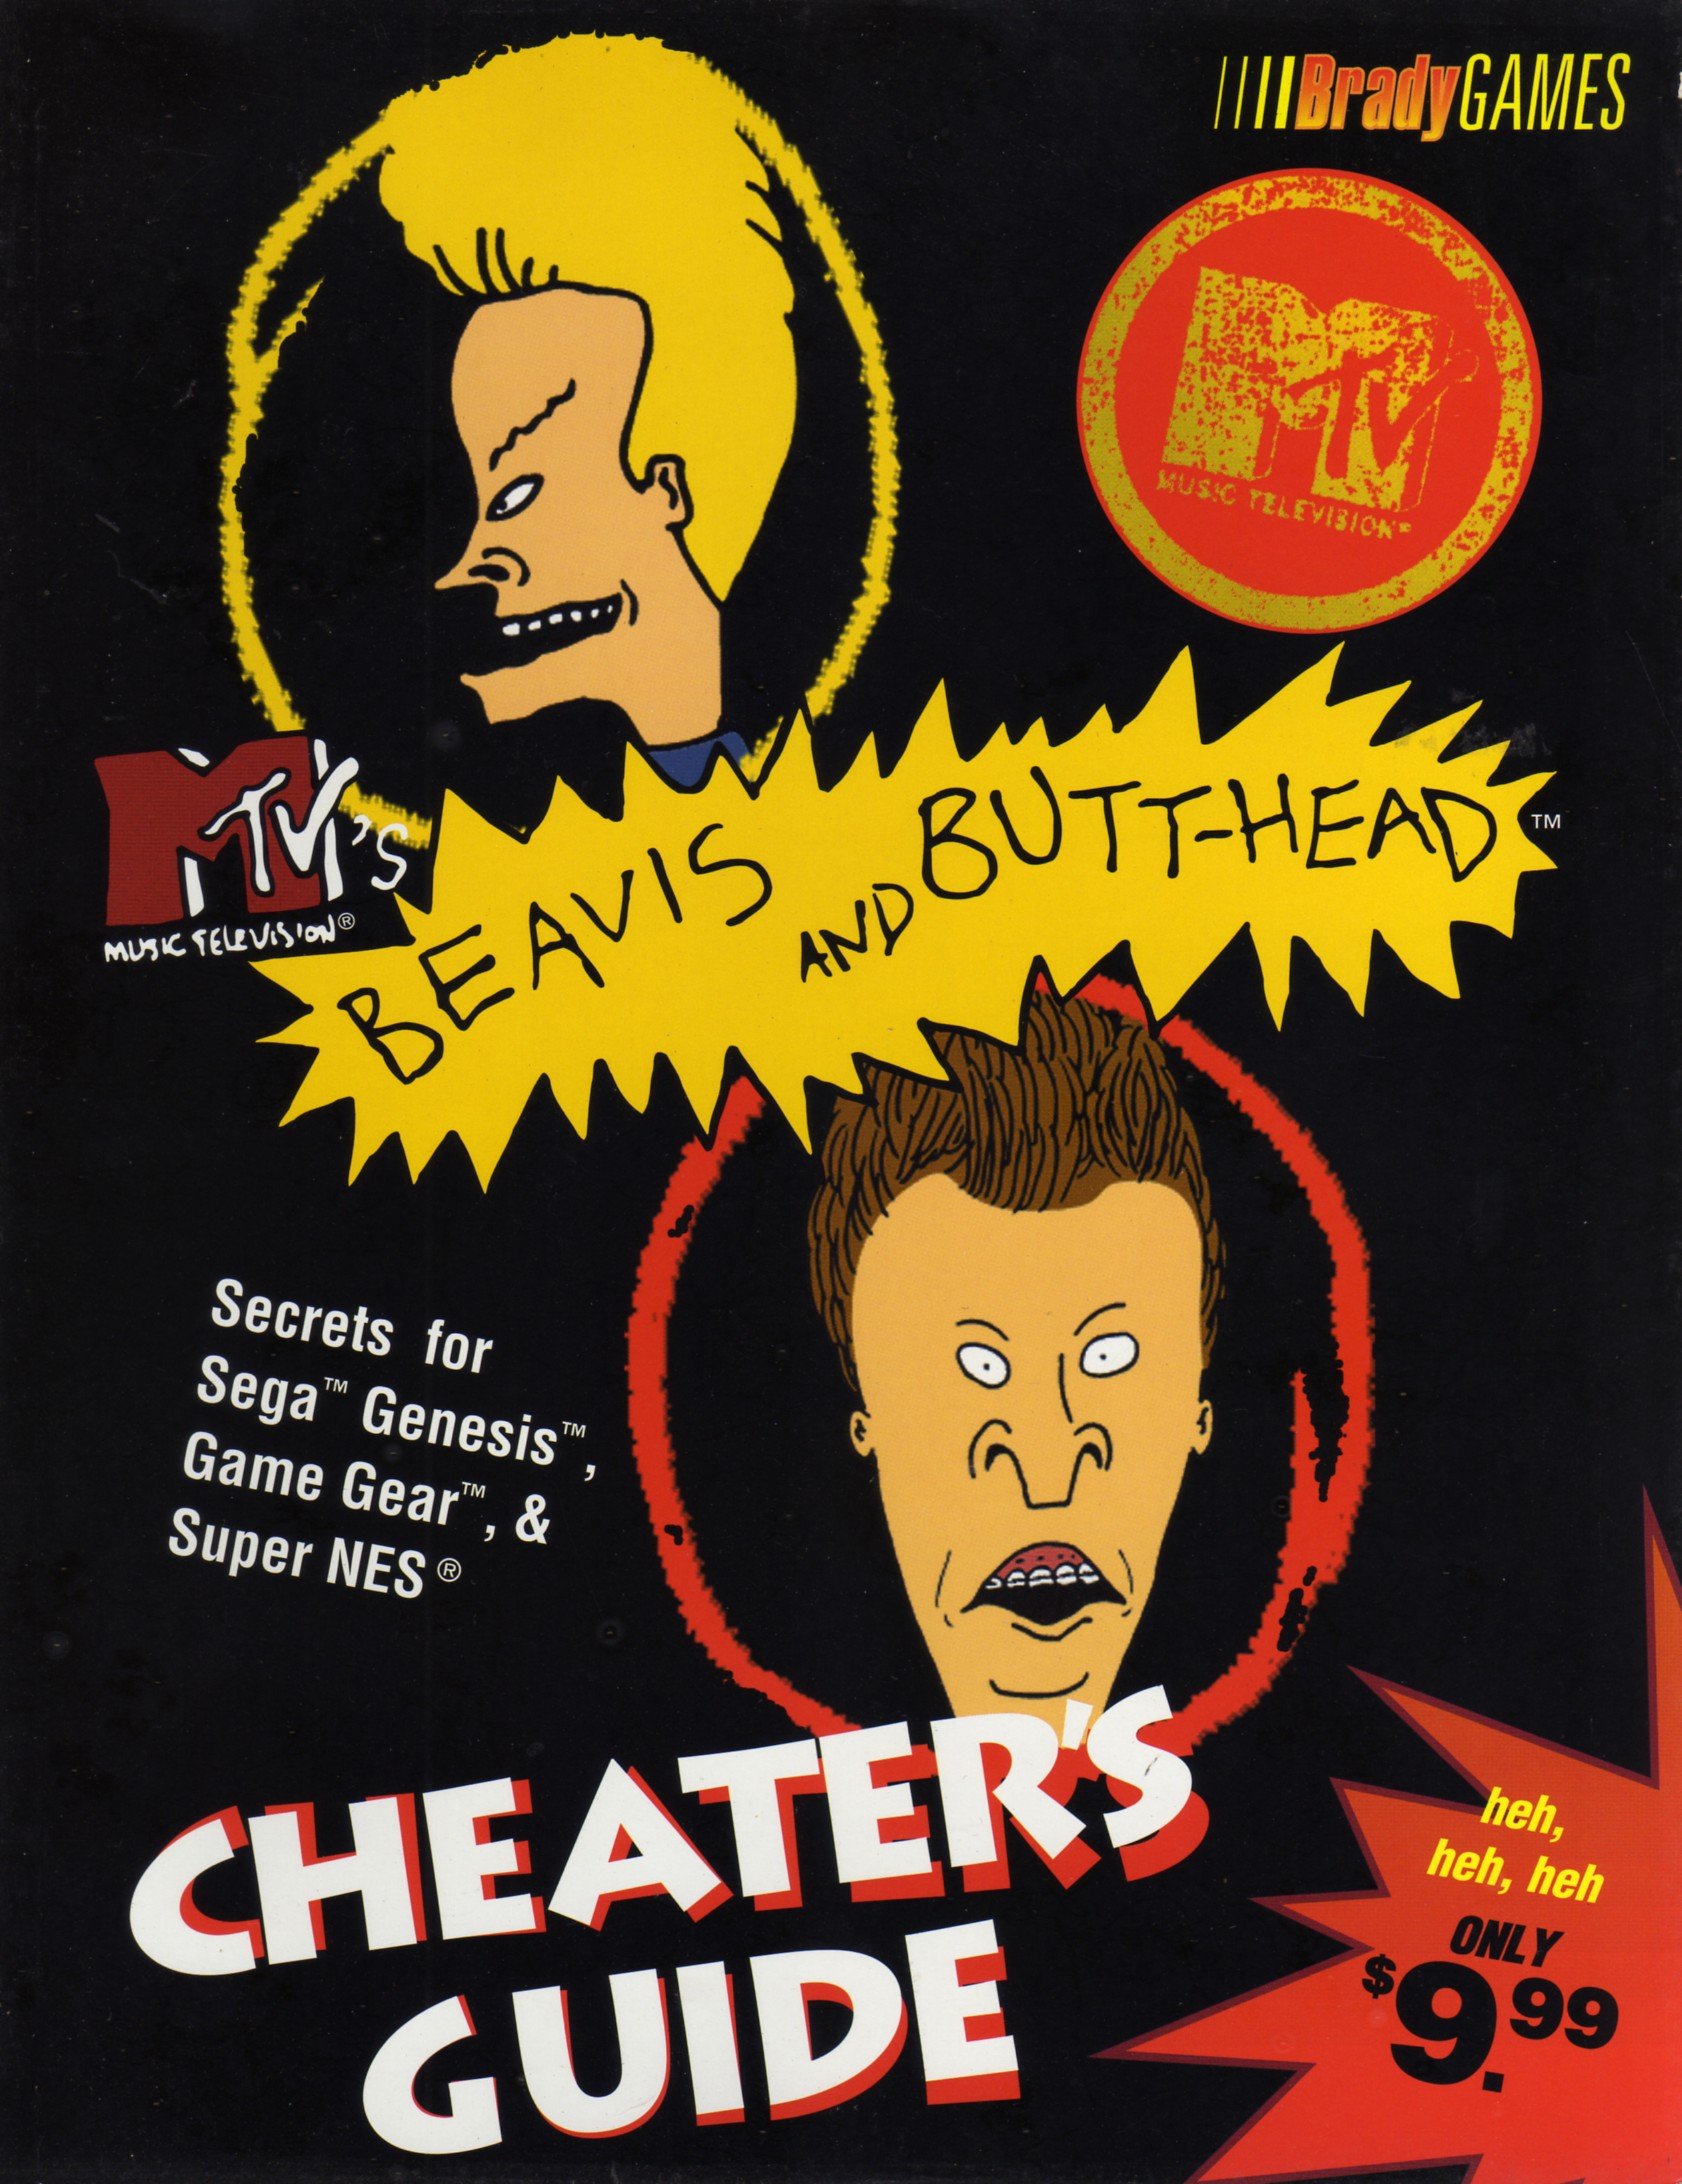 More information about "Beavis and Butt-Head Cheater's Guide"